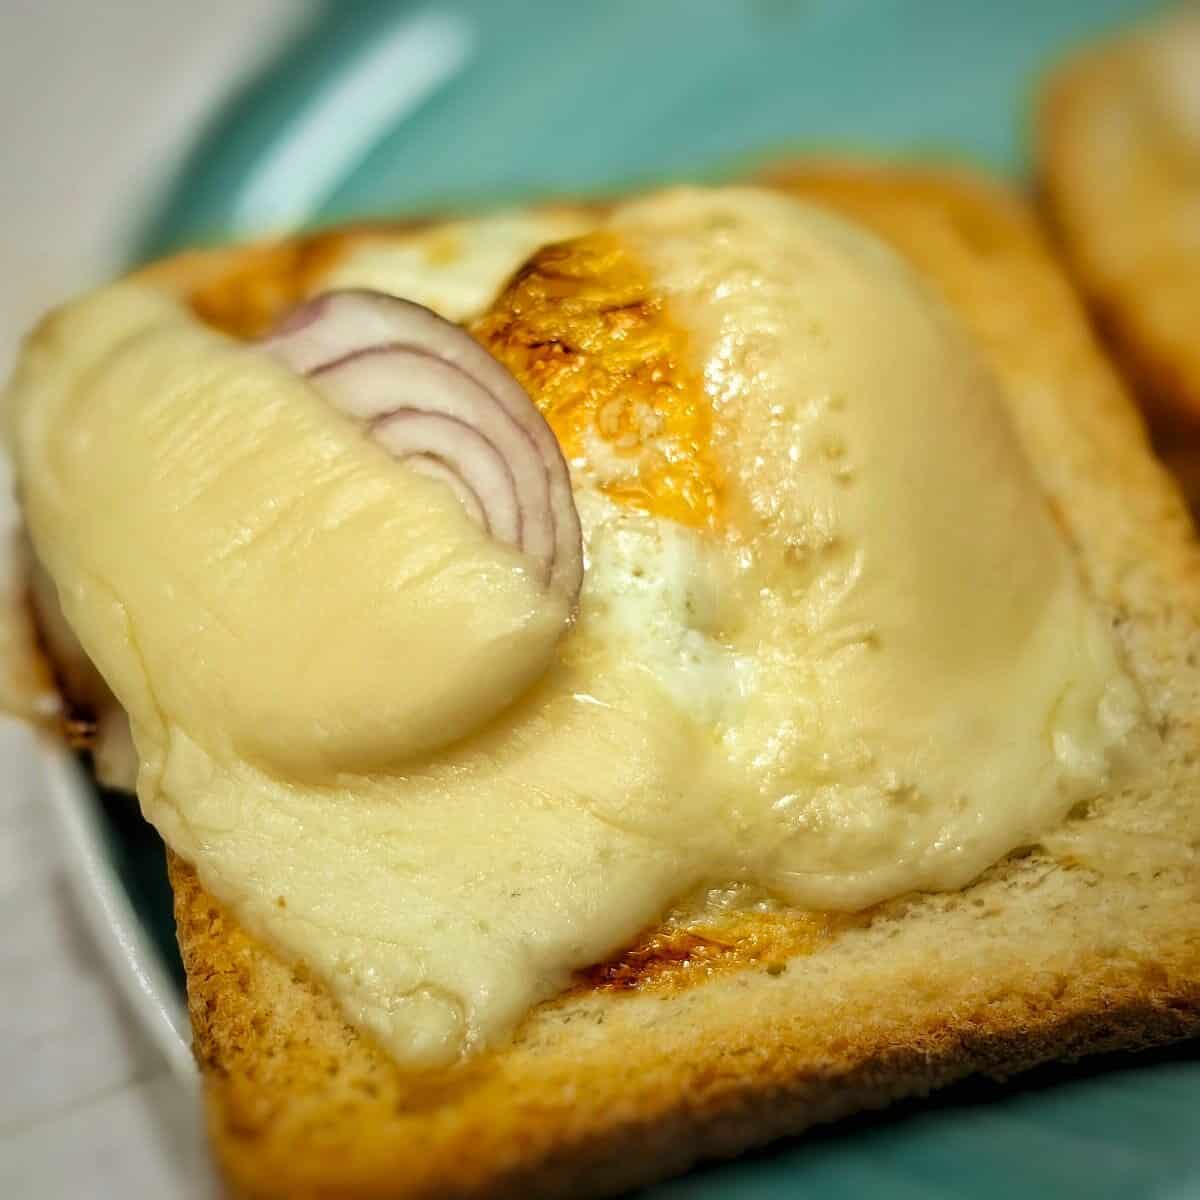 melted cheese, cooked shallot and egg on top of toasted bread